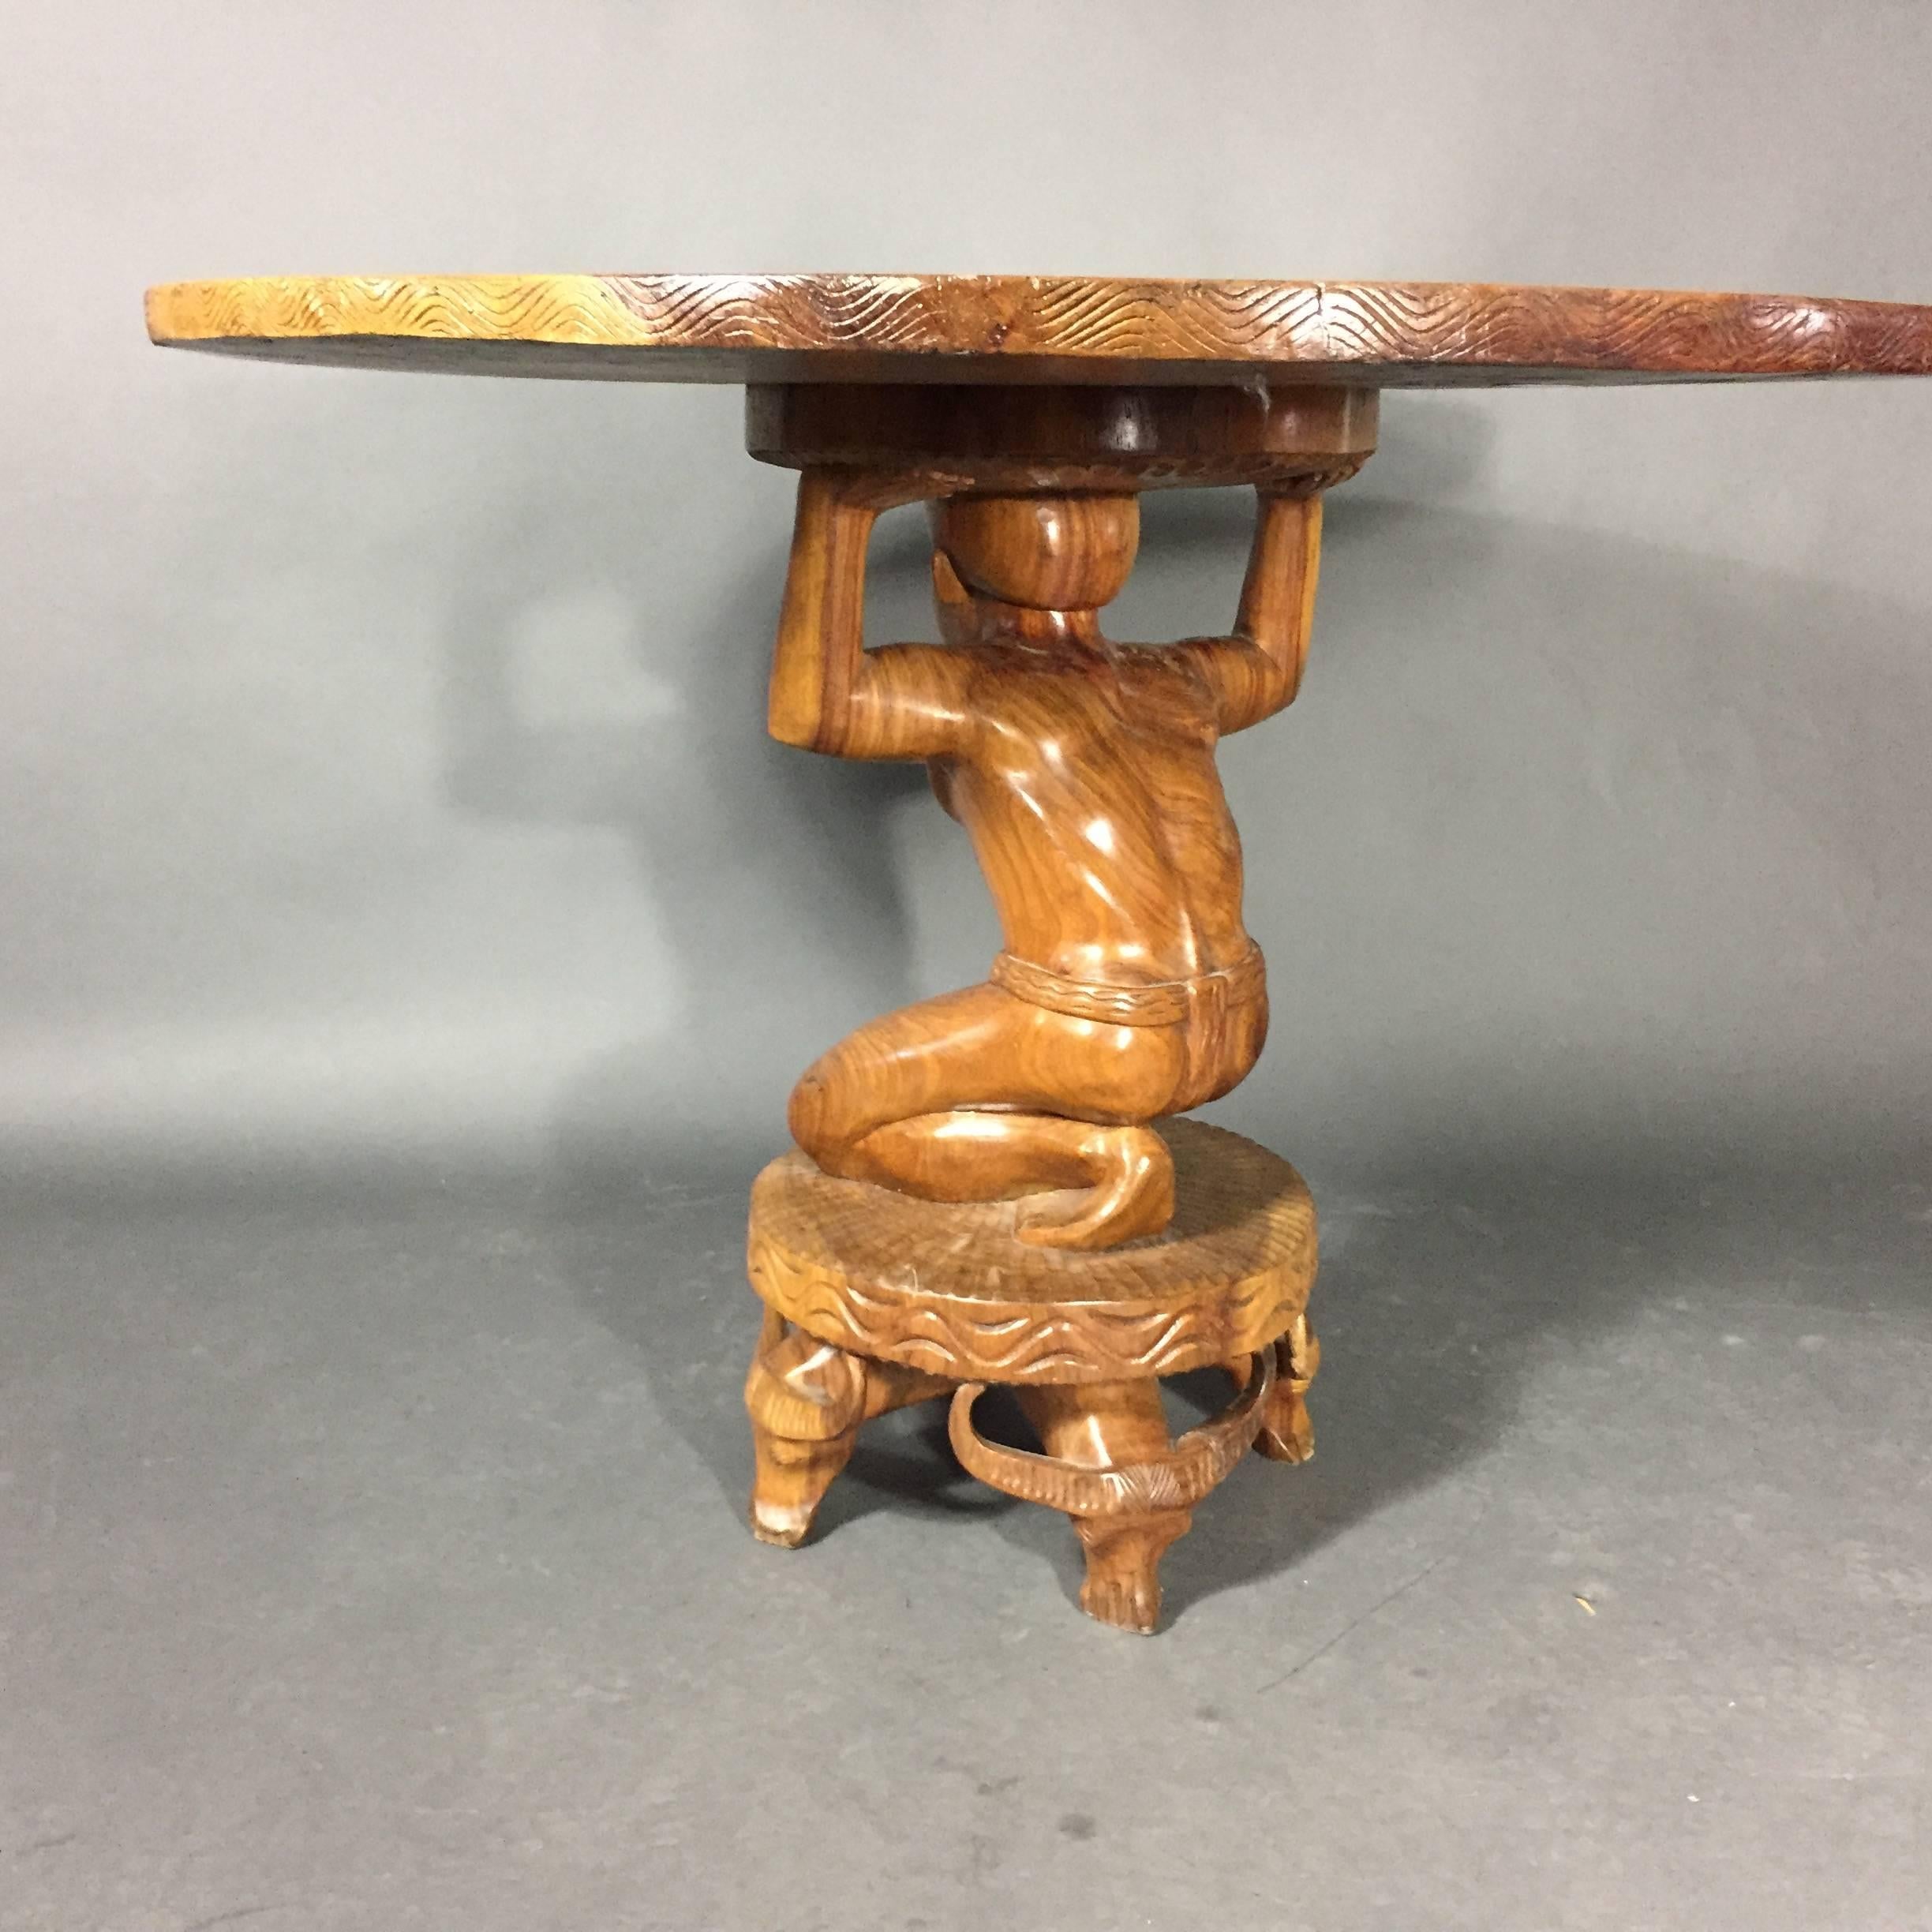 Hand-Carved Early 1900s, Philippine Hardwood Figural Center Table